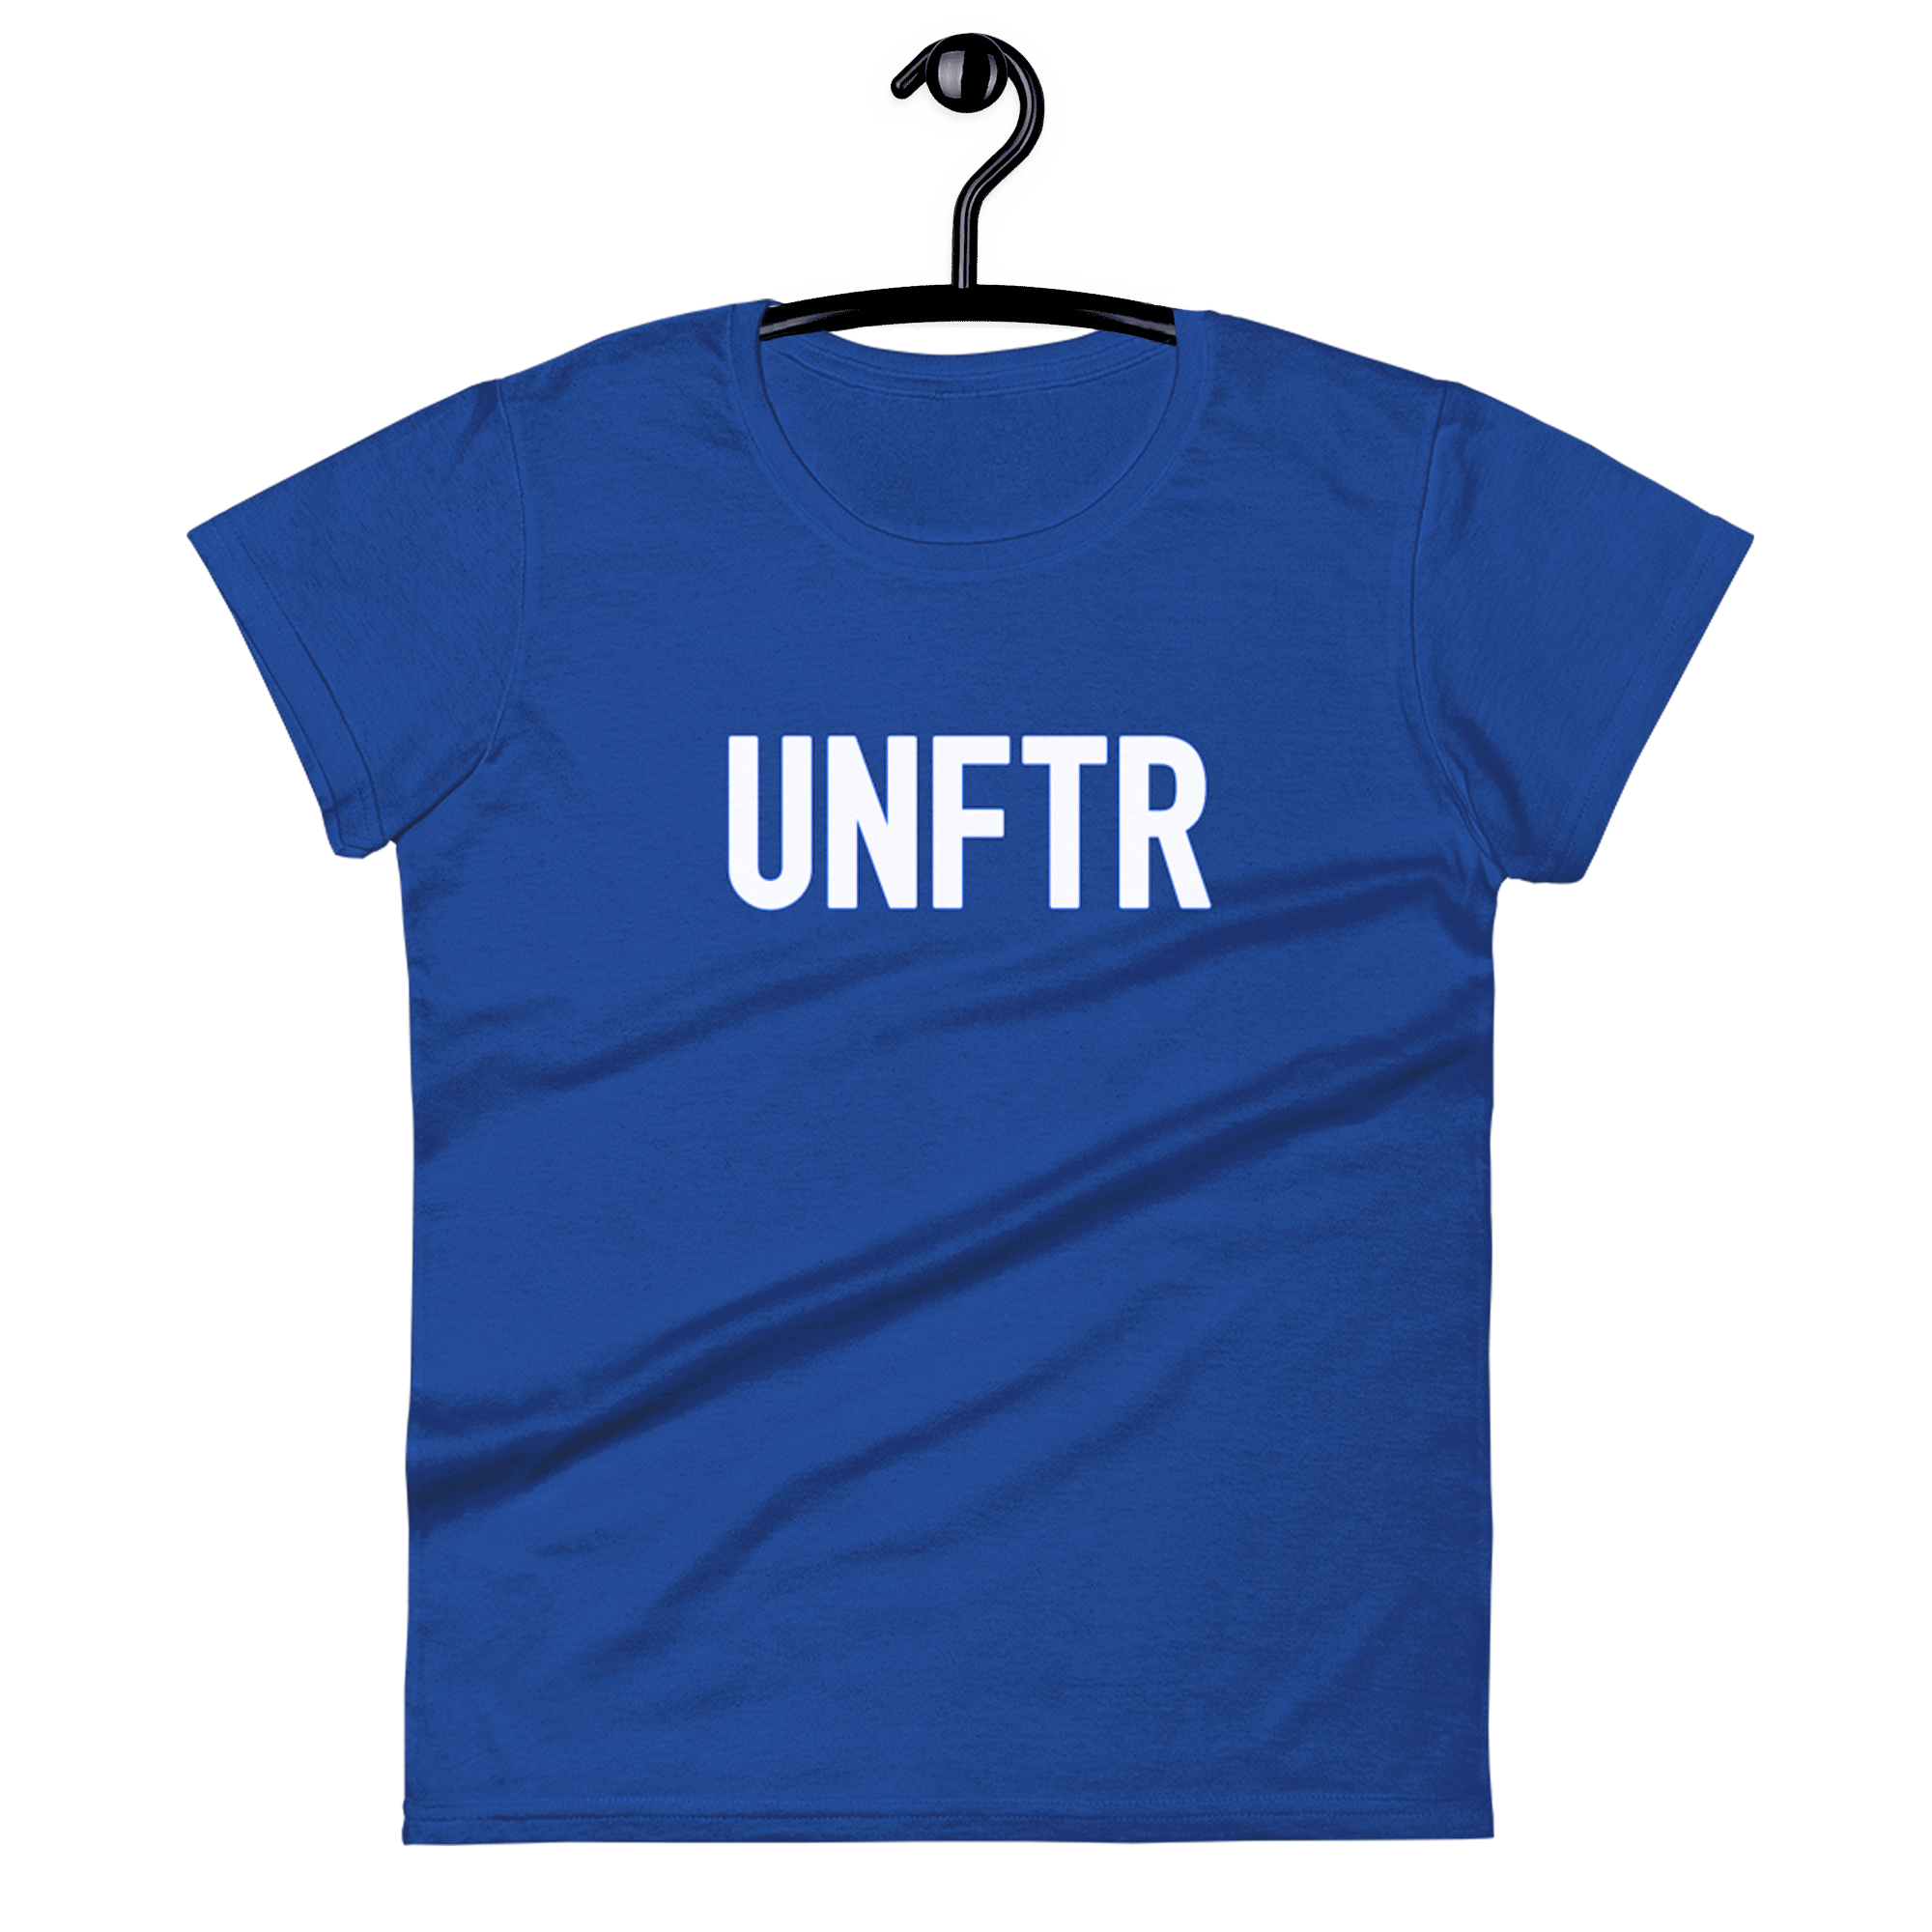 Blue fitted tee shirt that says UNFTR in white on the front and Meeting People Where They Are in white on the back